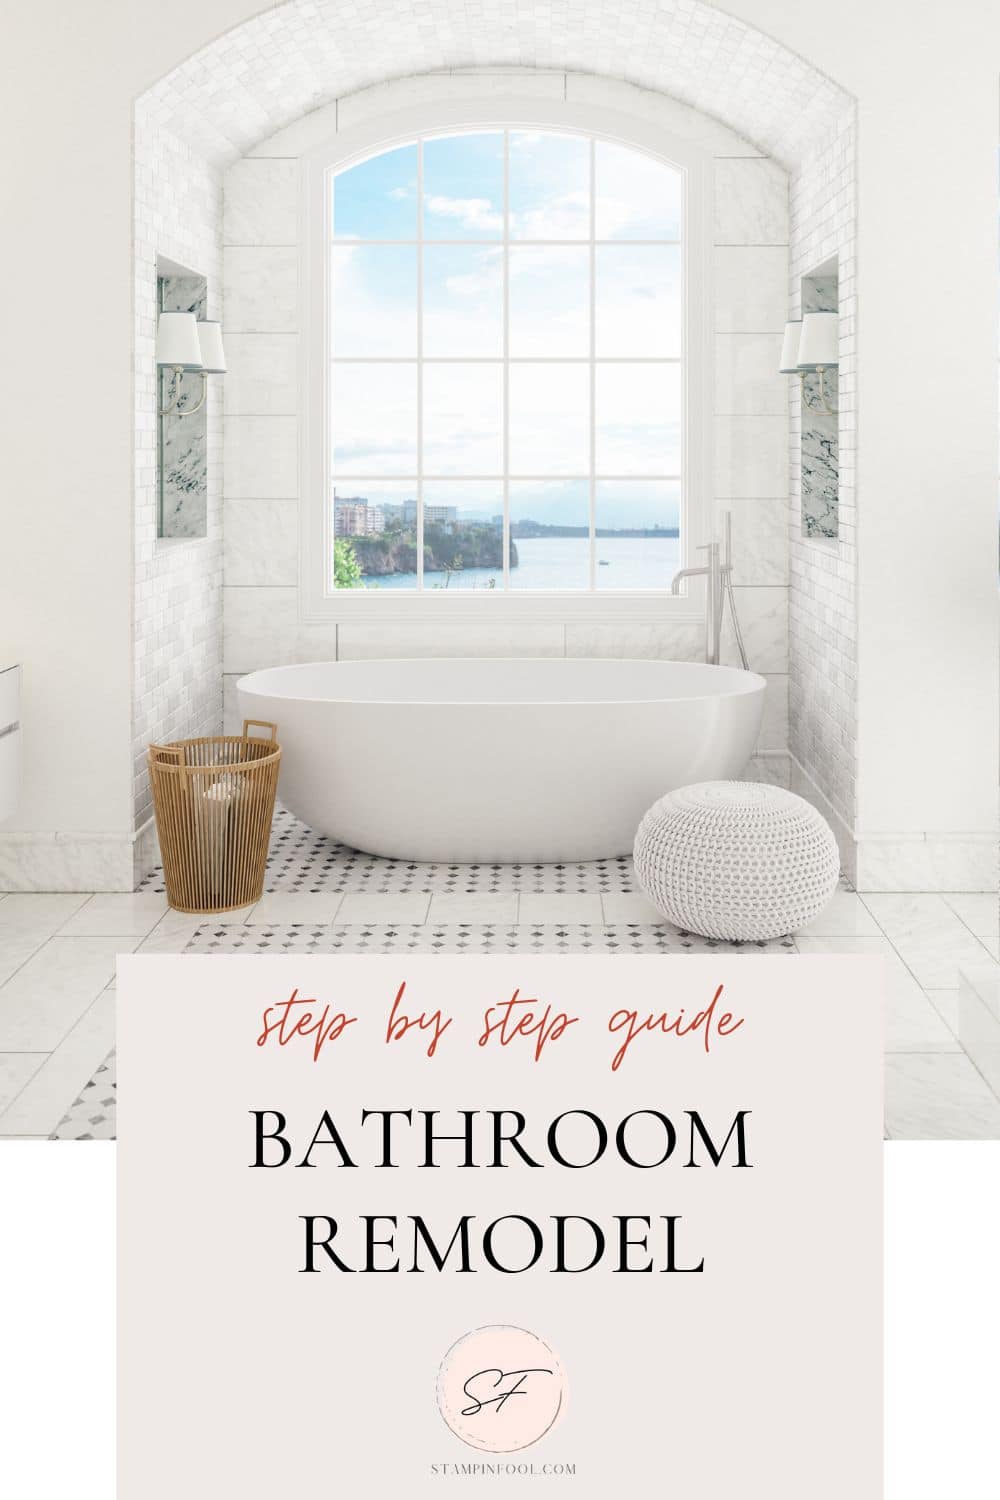 bathroom remodel process step by step guide